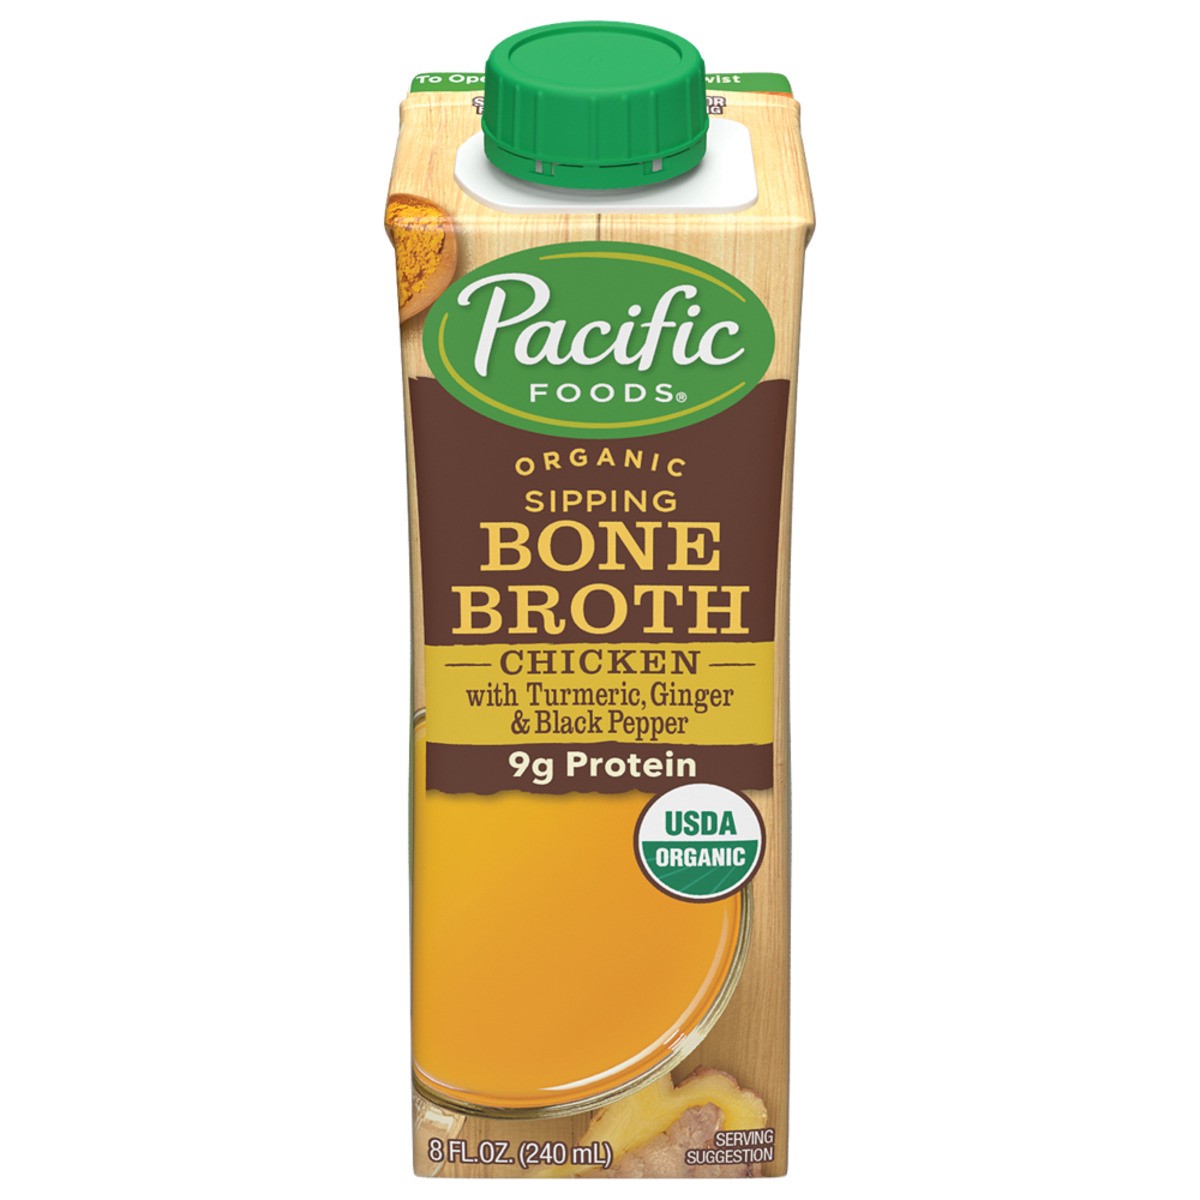 slide 5 of 8, Pacific Foods Organic Chicken Bone Broth with Turmeric, Ginger, & Black Pepper, 8oz, 8 oz